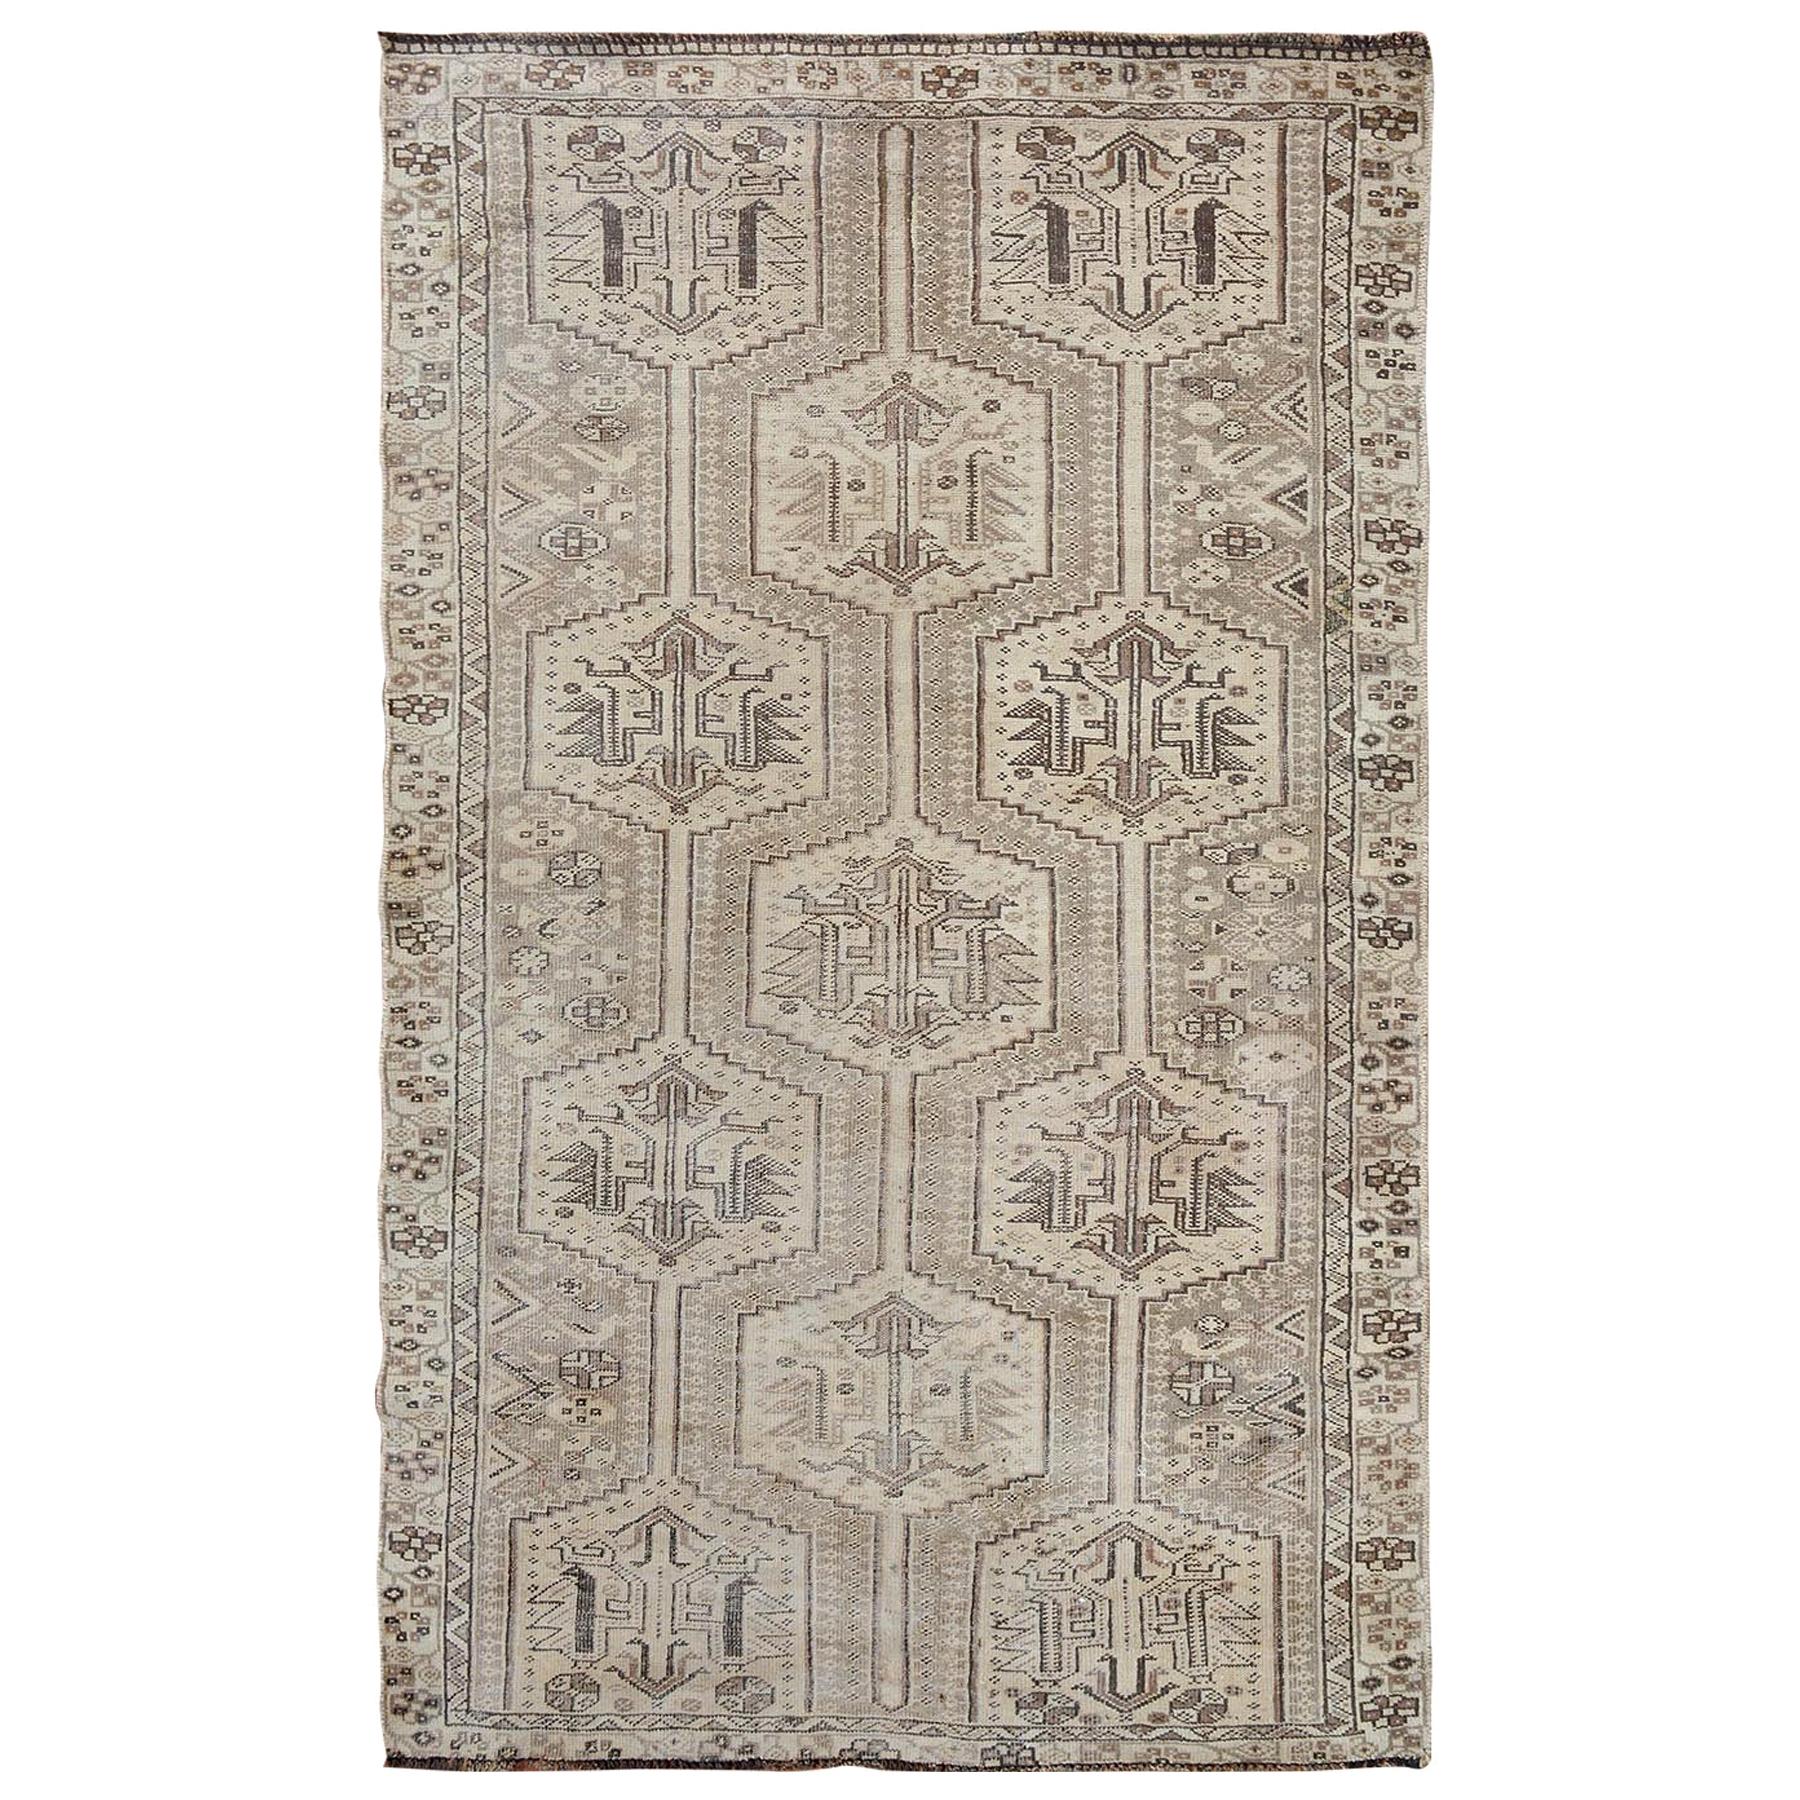 Earth Tone Colors Vintage and Worn Down Persian Shiraz Hand Knotted Oriental Rug